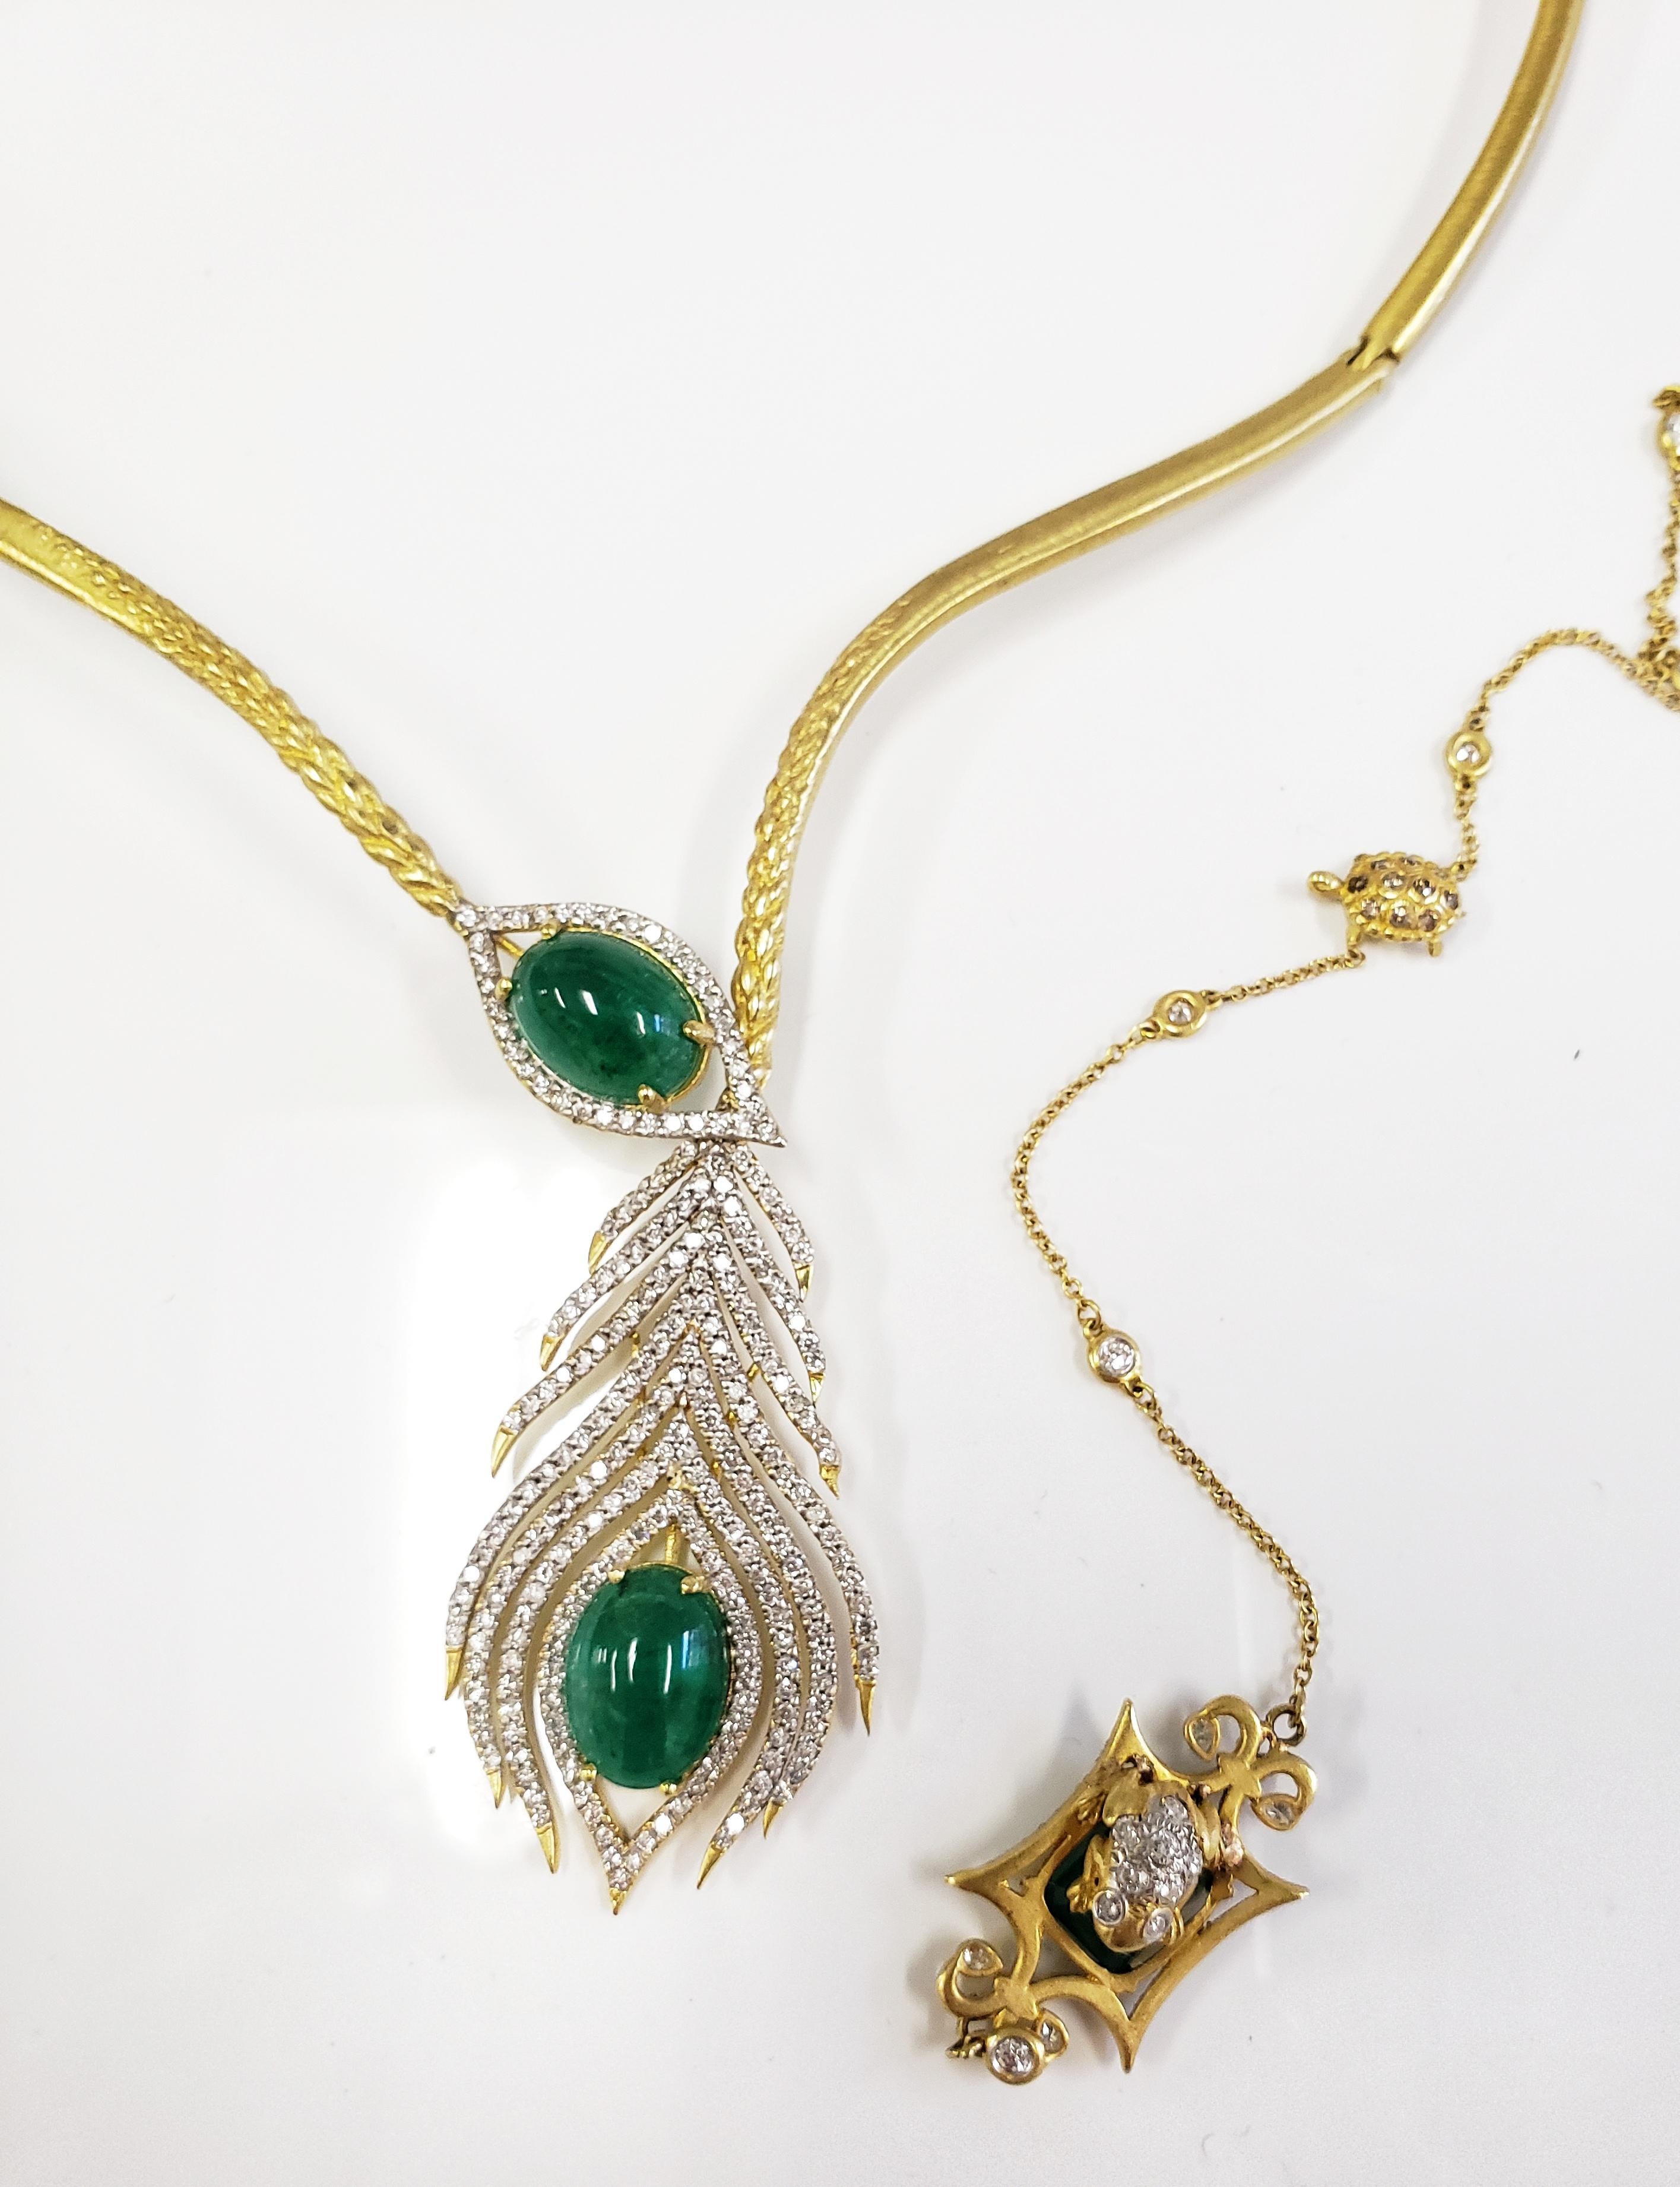 Exquisitely crafted Tanya Farah 18K gold diamond and emerald peacock feather collar necklace with  18K Baguette Emerald Diamond Chain that beautifully drips down to be worn in the back or front.  Hinged front to effortlessly slip on and off.  Tanya